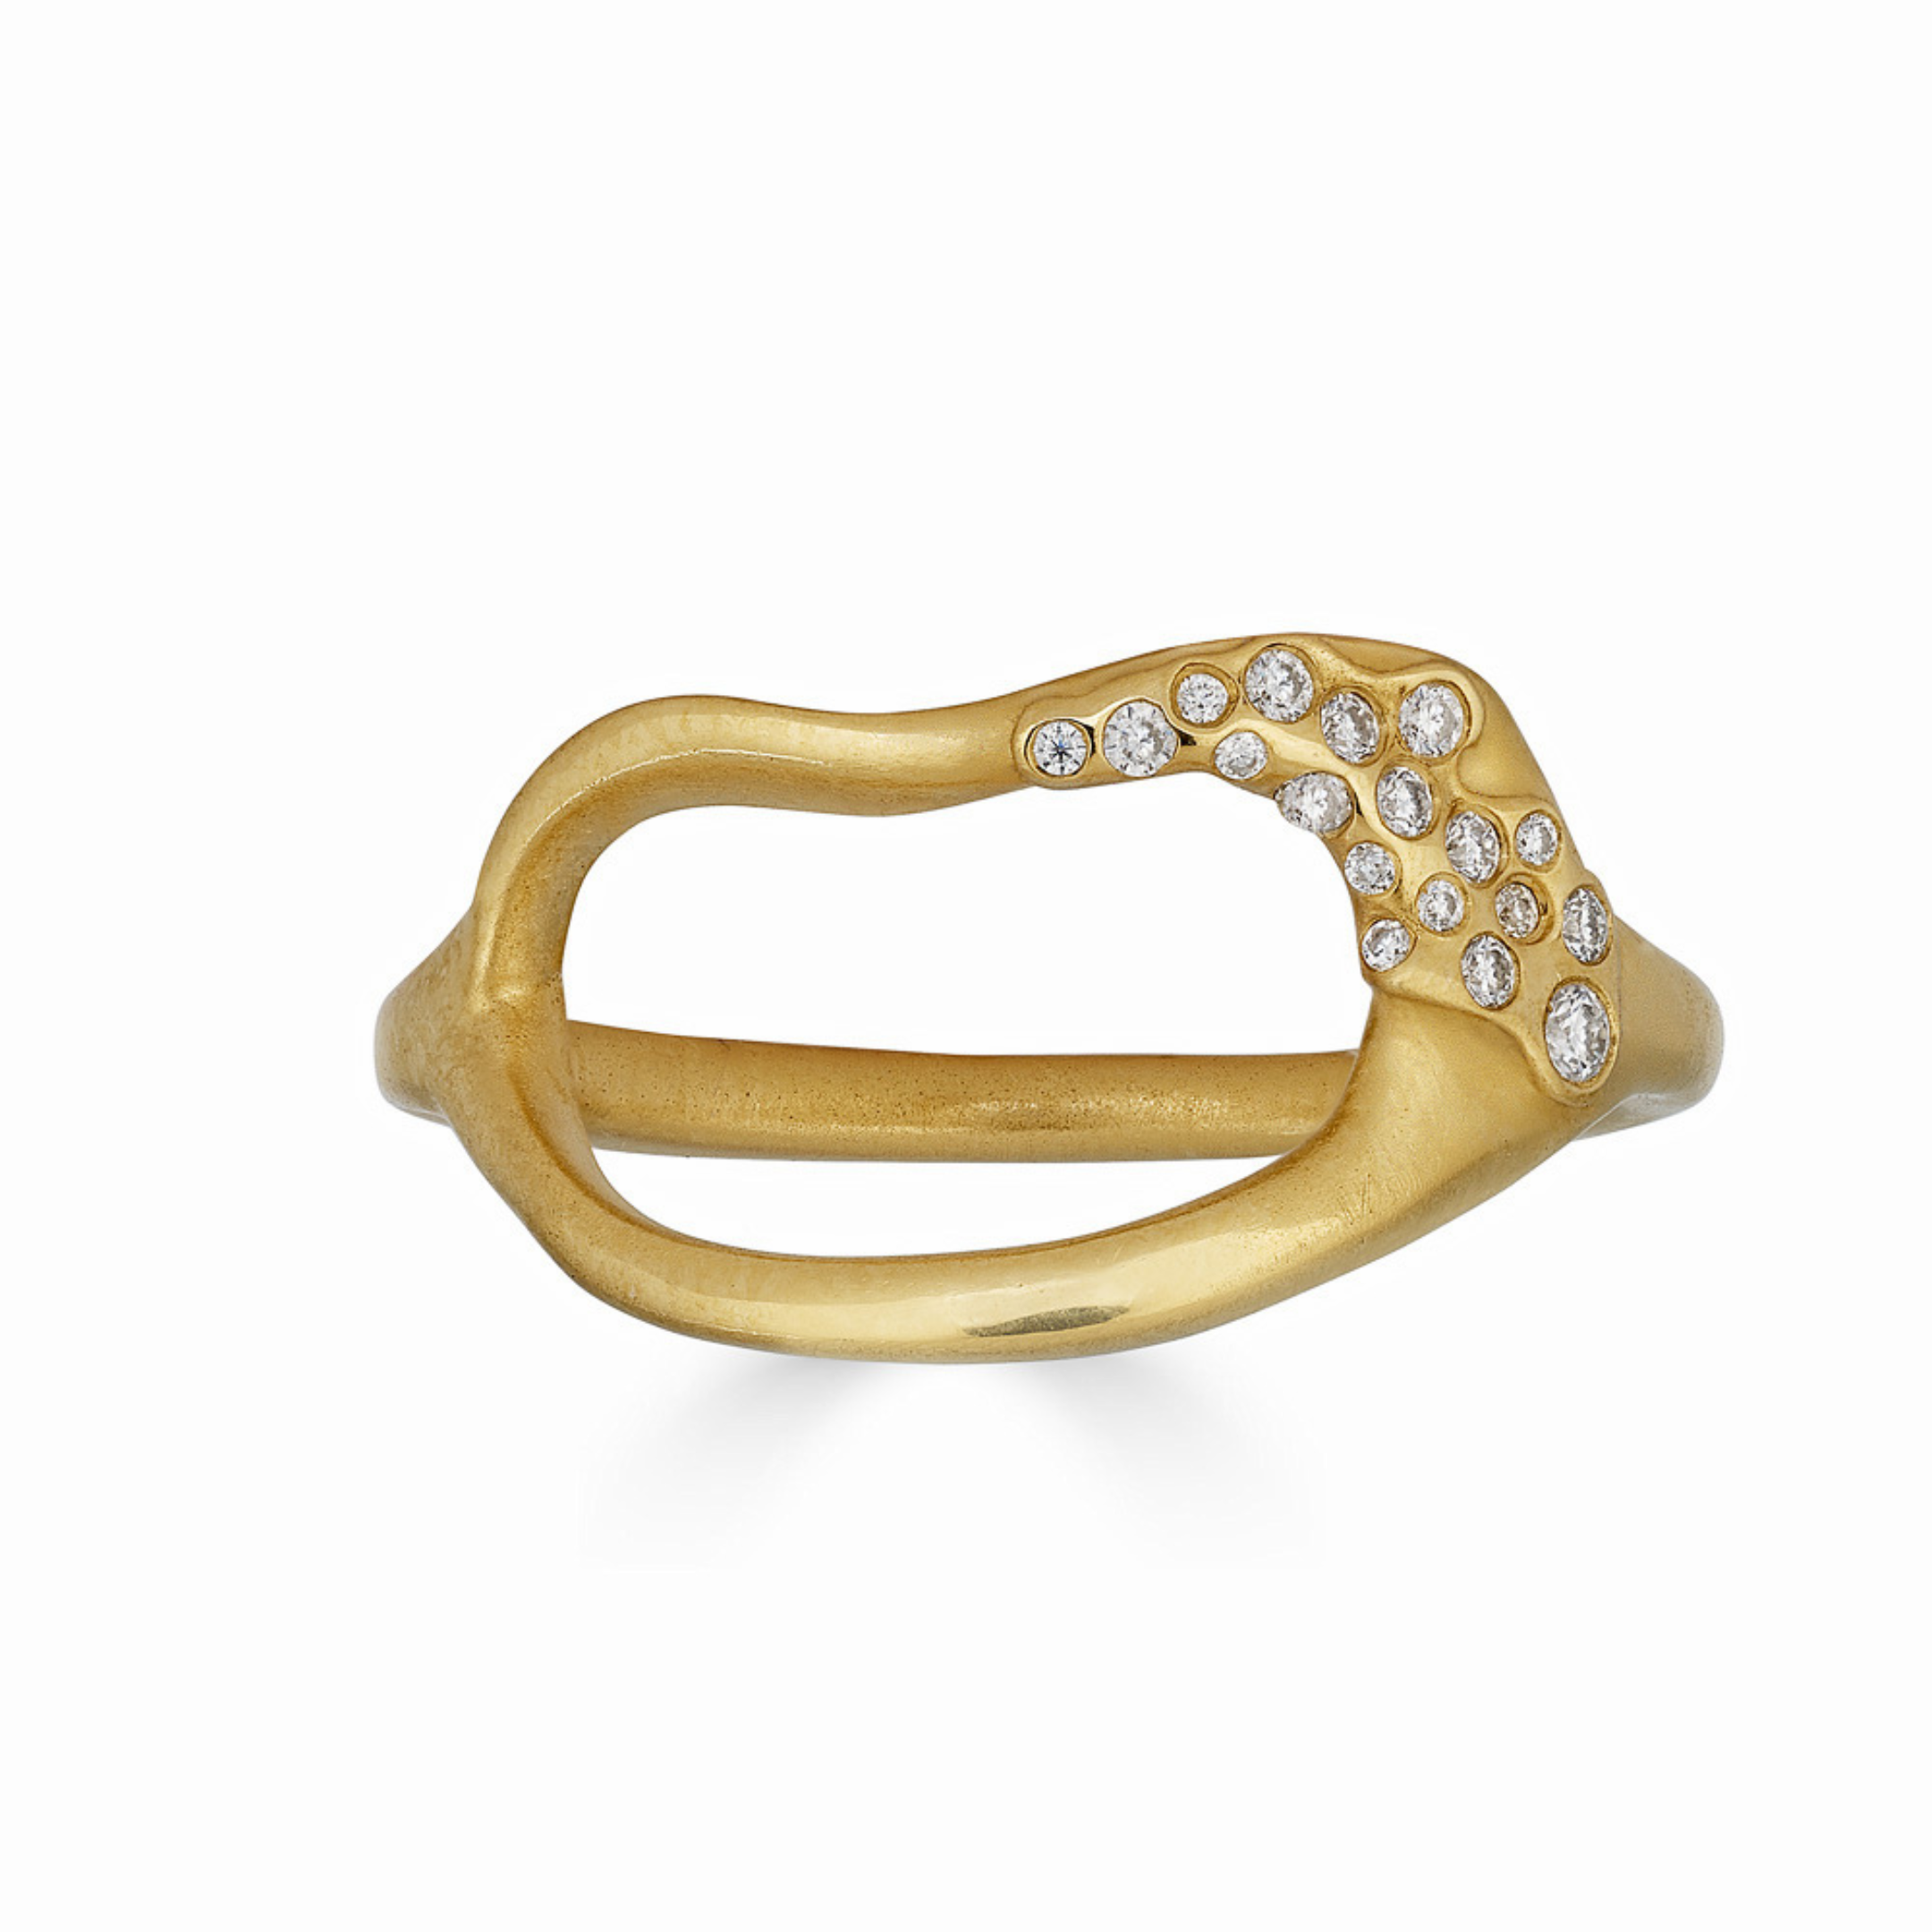 Ring With Diamonds - 18K Gold Vermeil